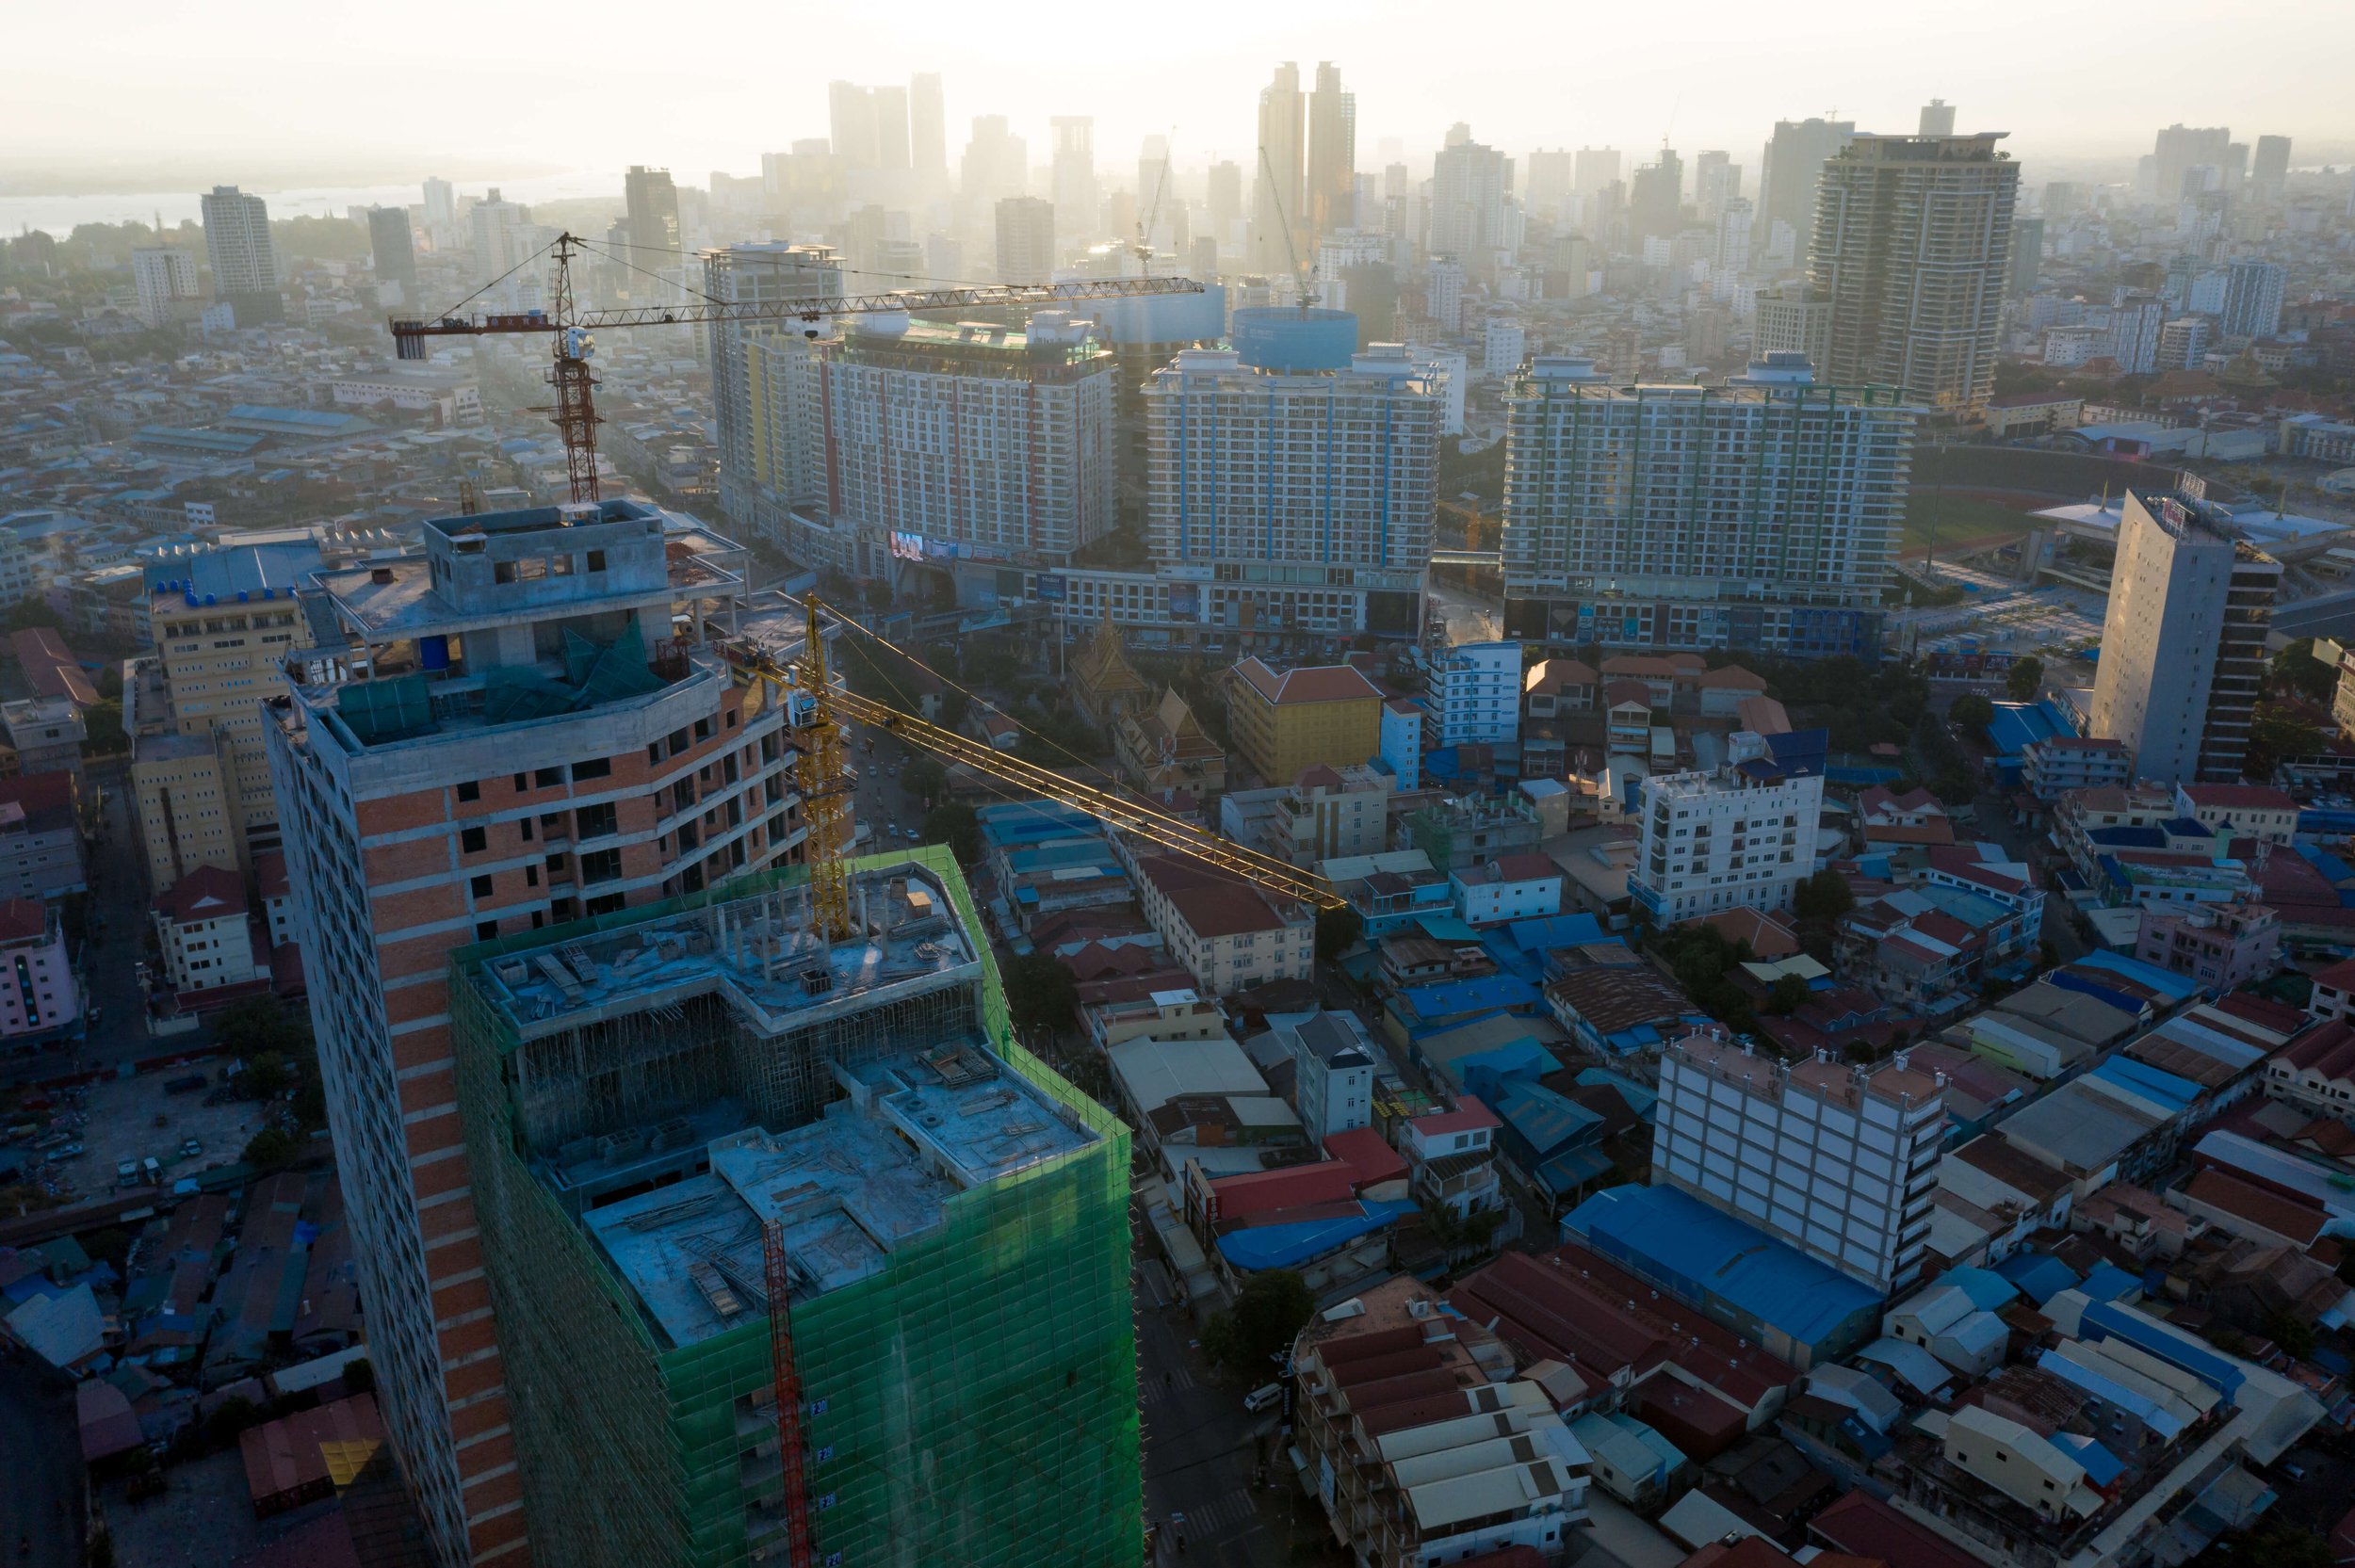  Phnom Penh’s skyline has changed dramatically over the last decade as a result of a construction boom. Despite the fallout from the pandemic, the construction sector still attracted an investment of $10.3 billion in the first 11 months of 2021. 